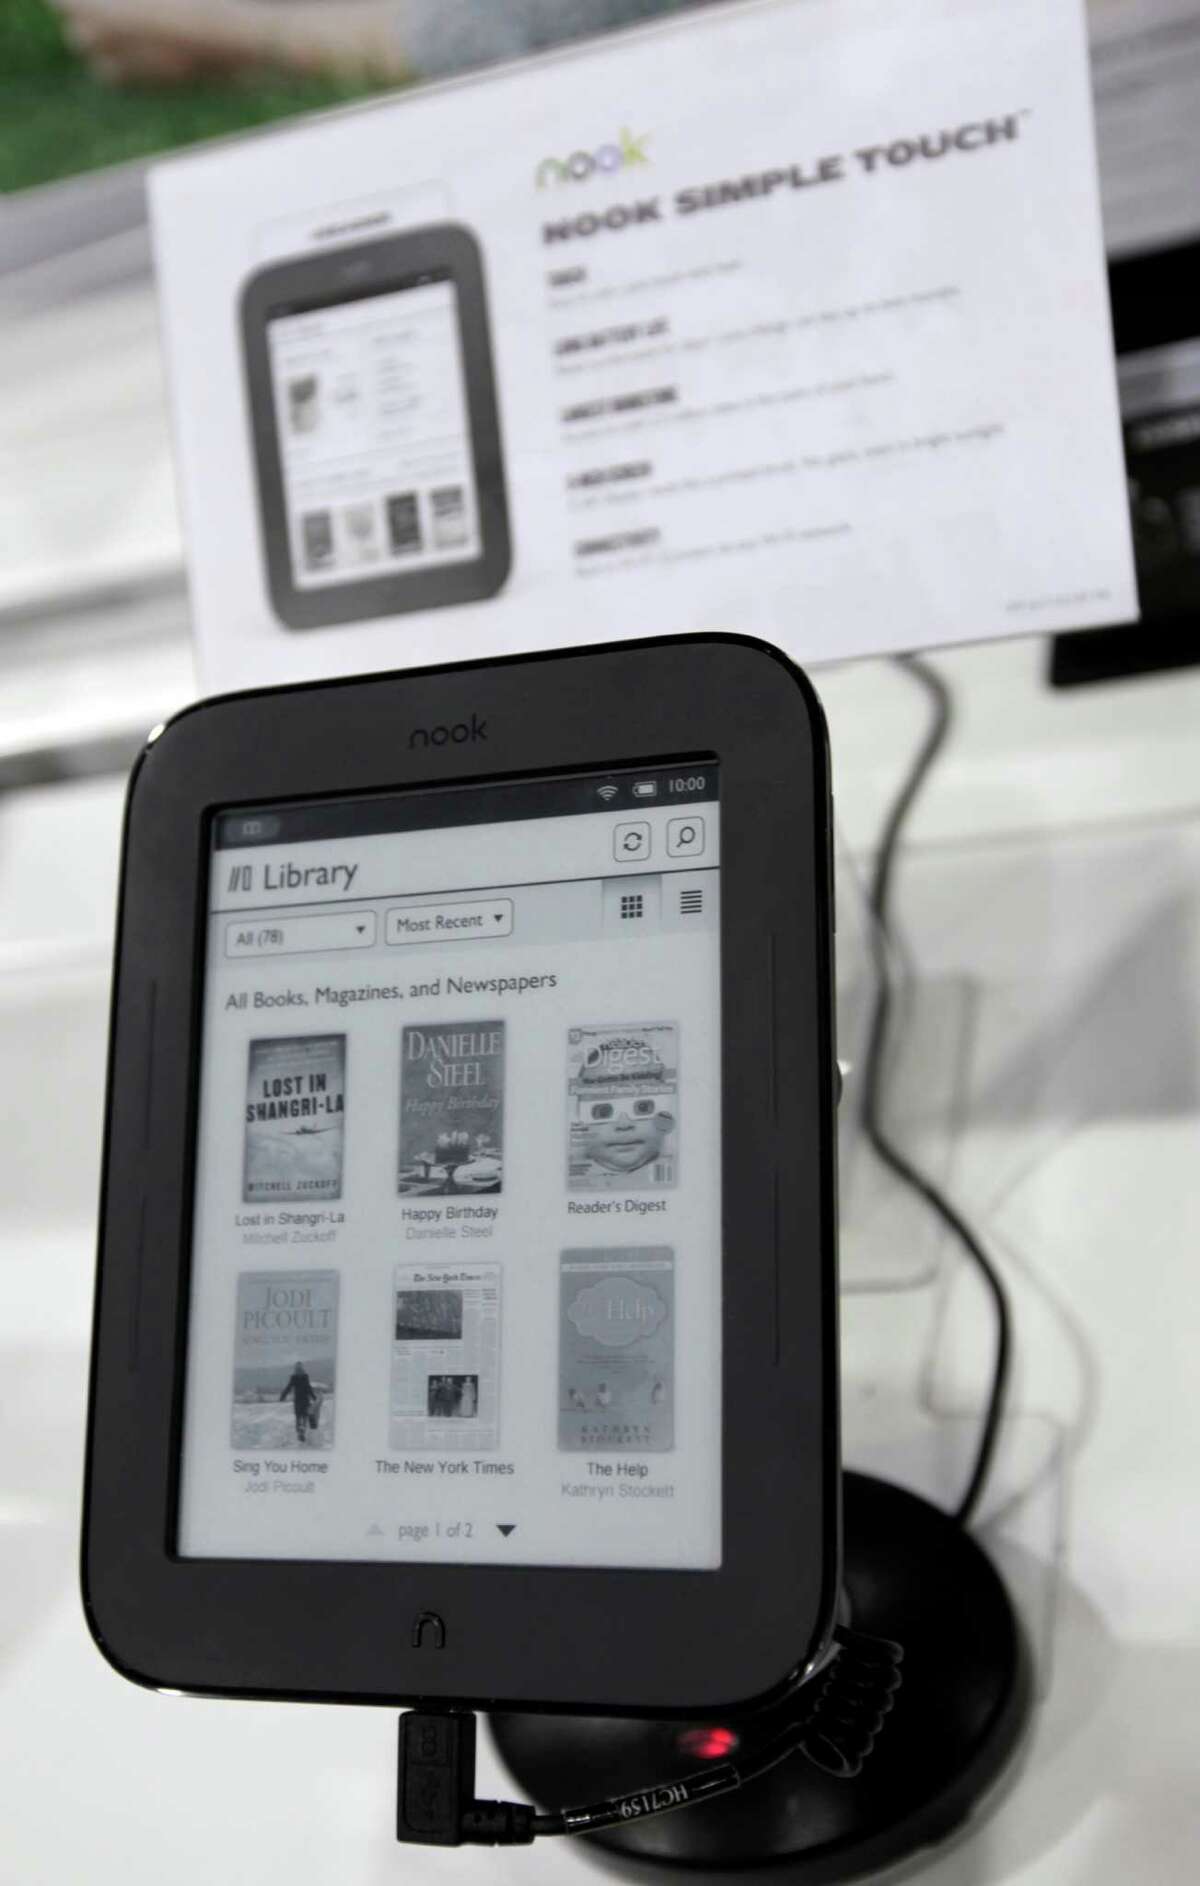 A Barnes & Noble Nook Simple Touch eReader on display at a Best Buy in Mountain View, Calif., Monday, April 30, 2012. An infusion of money from Microsoft Corp. sent Barnes & Noble Inc.'s stock zooming Monday, as the software giant established a way to get back into the e-books business. The two companies are teaming up to create a subsidiary for Barnes & Noble's e-book and college textbook businesses, with Microsoft paying $300 million for a minority stake.